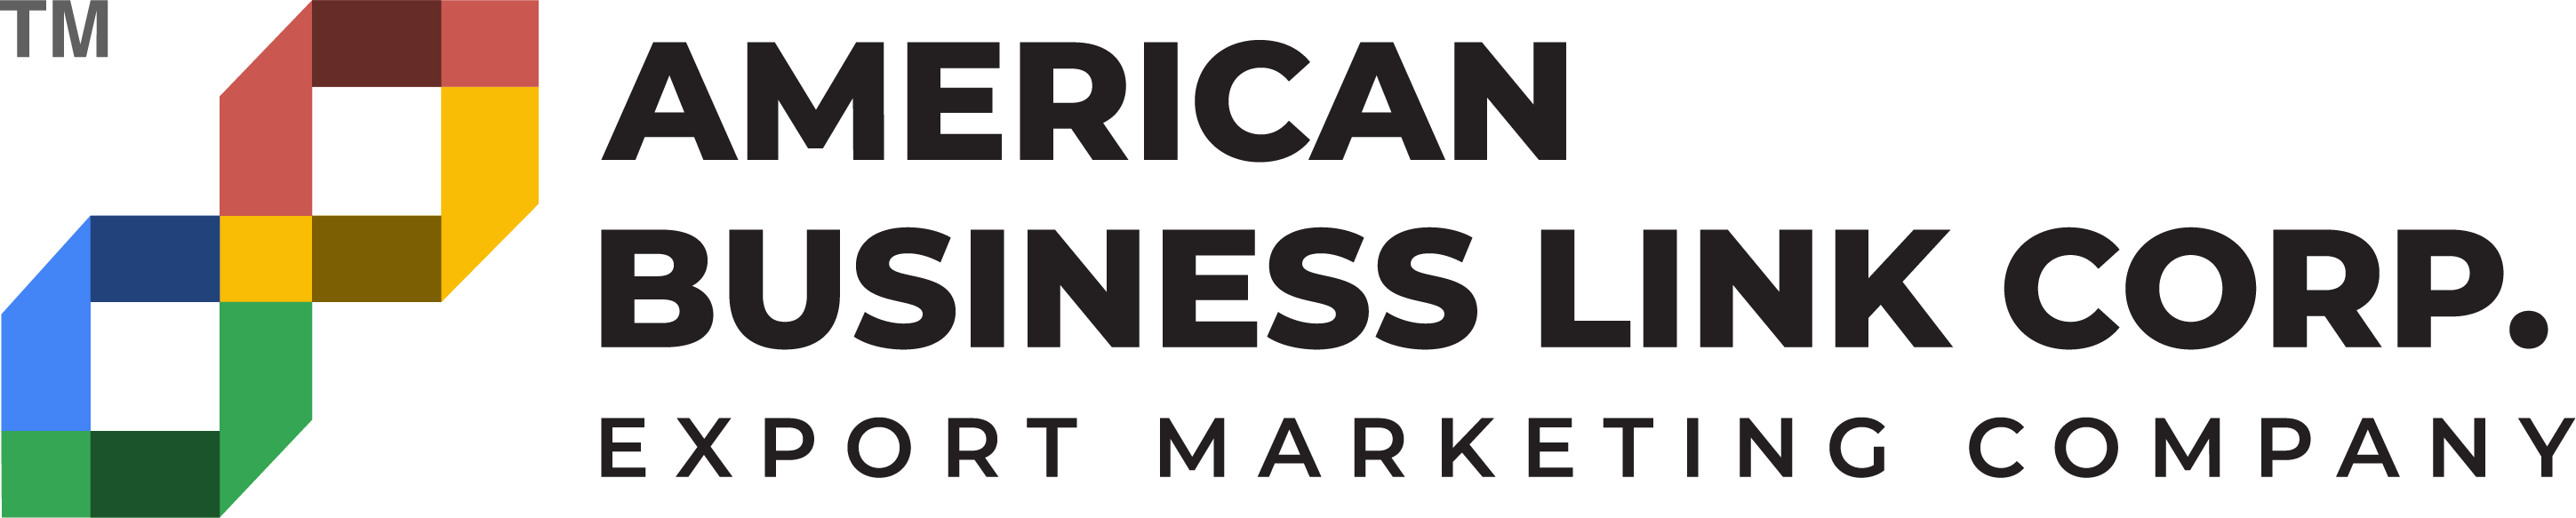 American Business Link